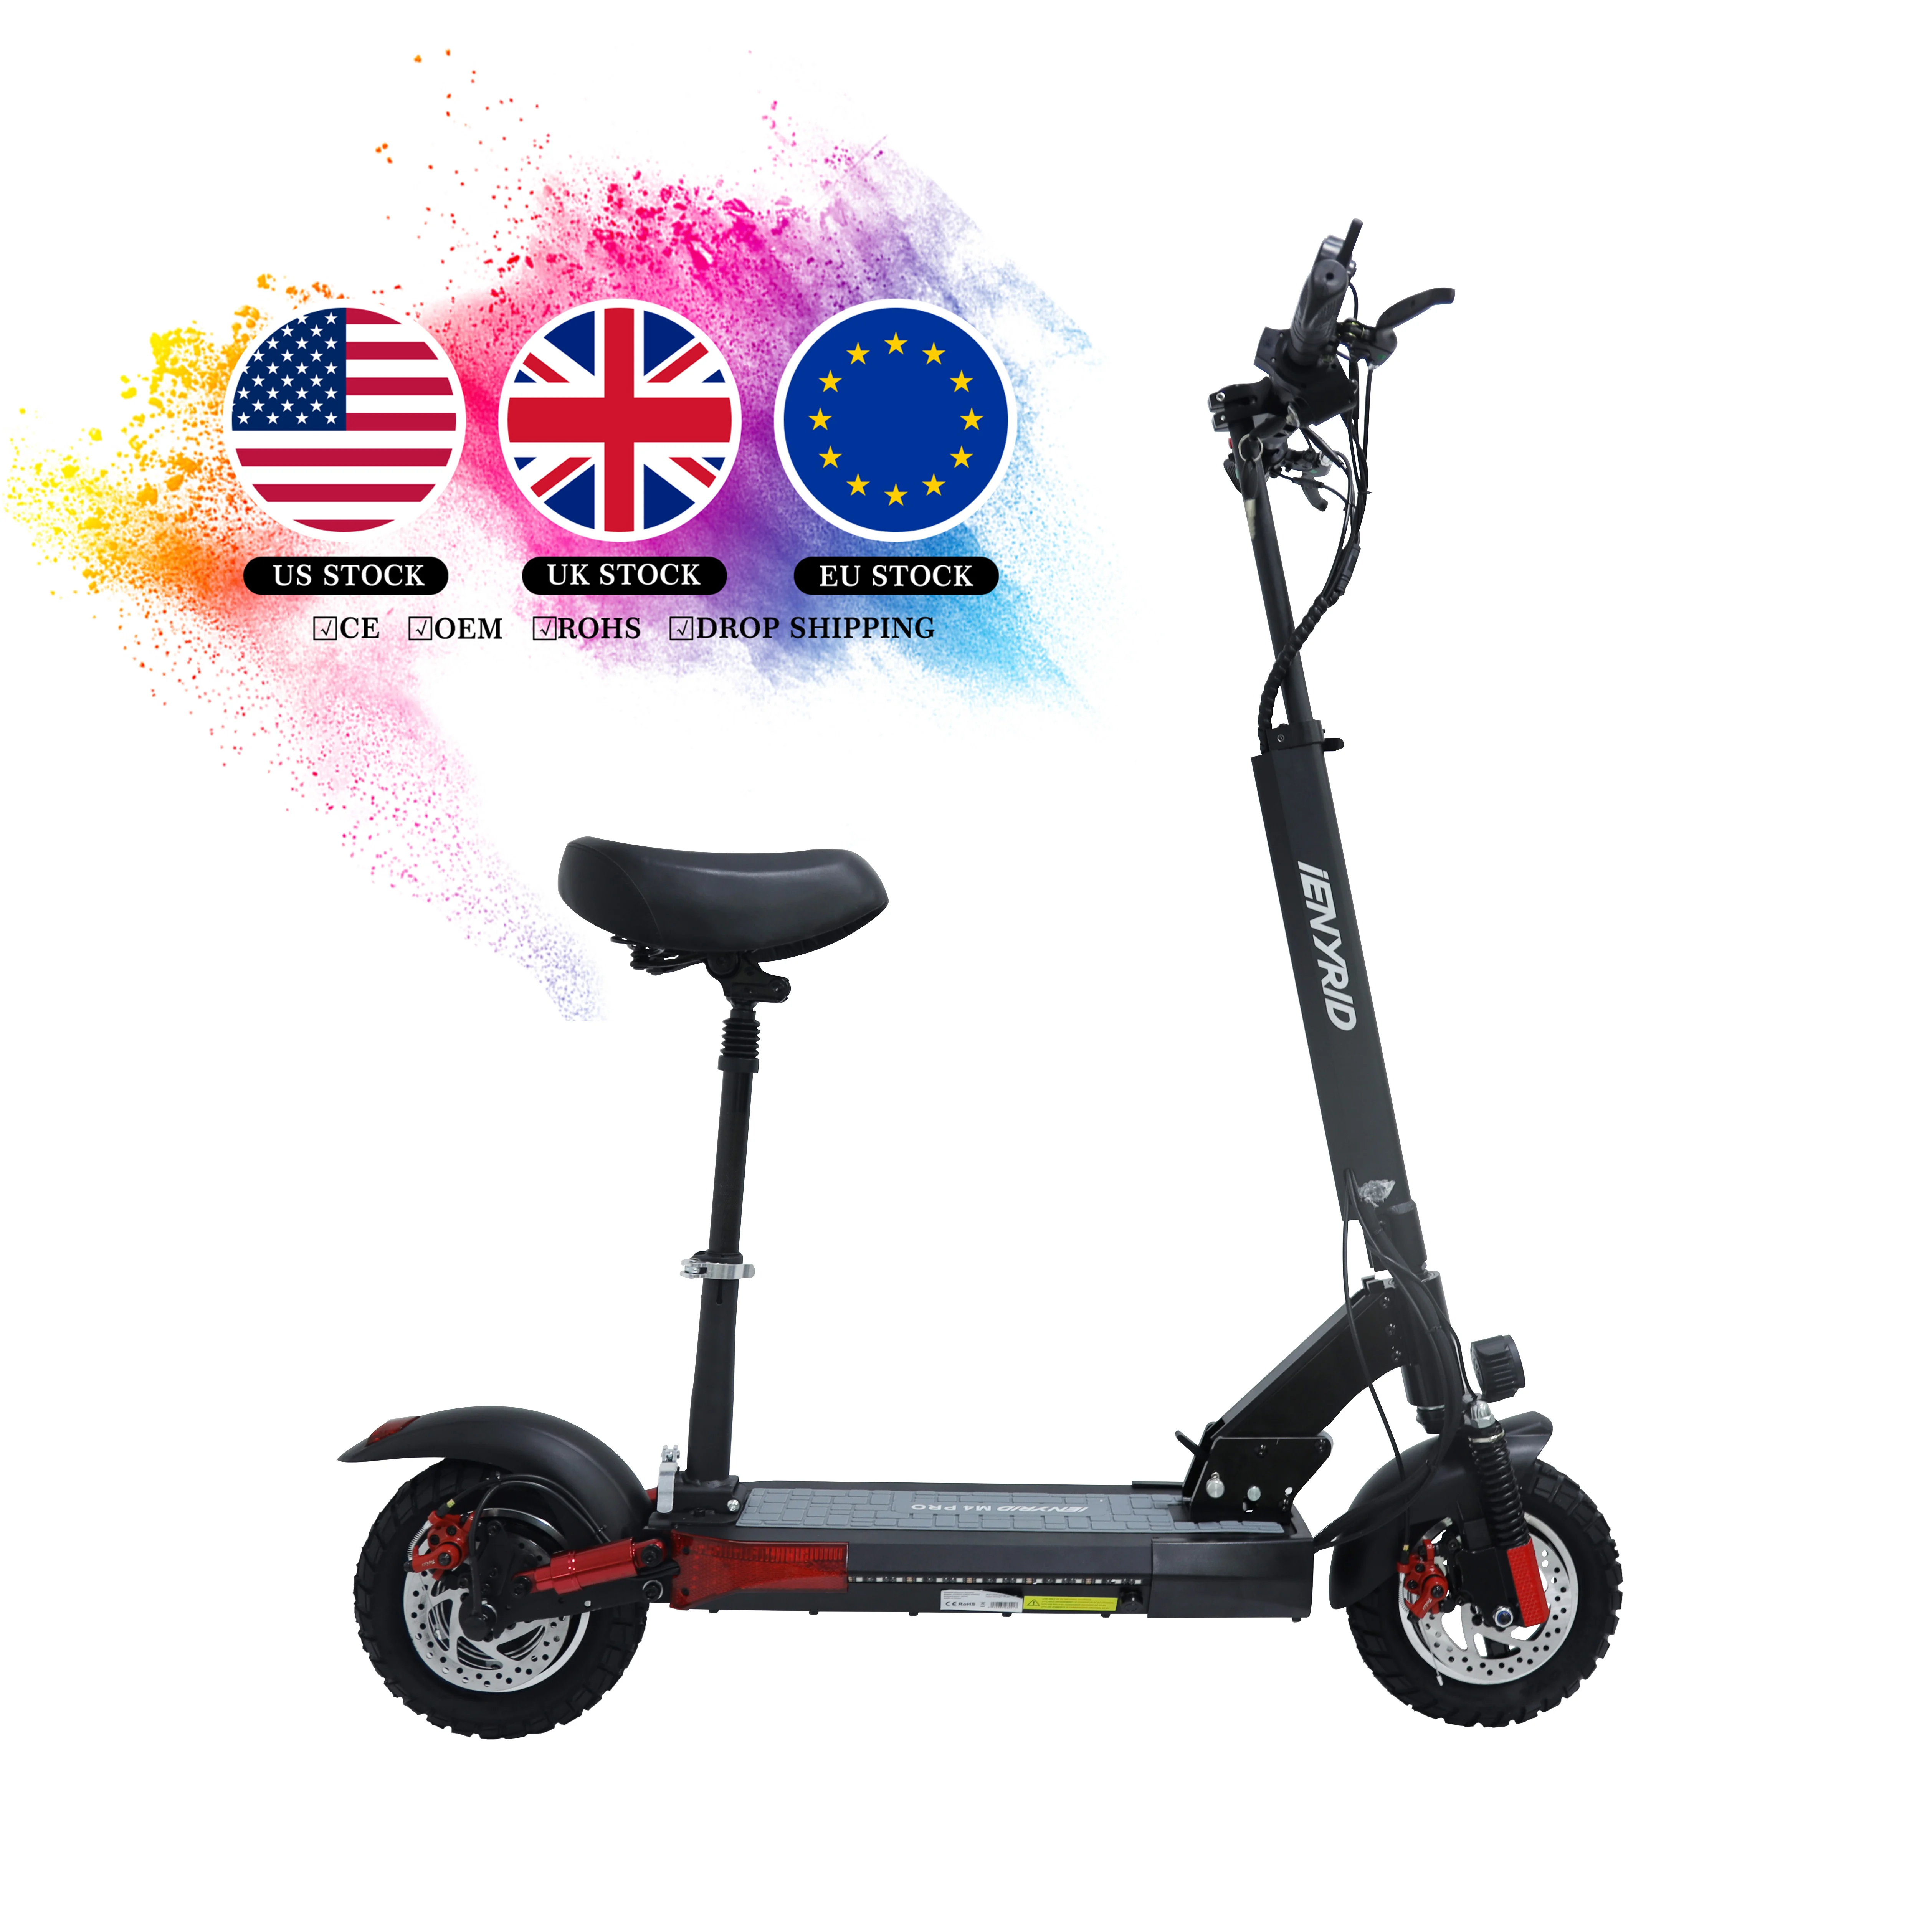 

EU UK US Warehouse Best Sell IENYRID M4 Pro Fat Tire 48V Mountain Mobility Folding Electric Foot Kick Scooters for Drop Shipping, Black+red